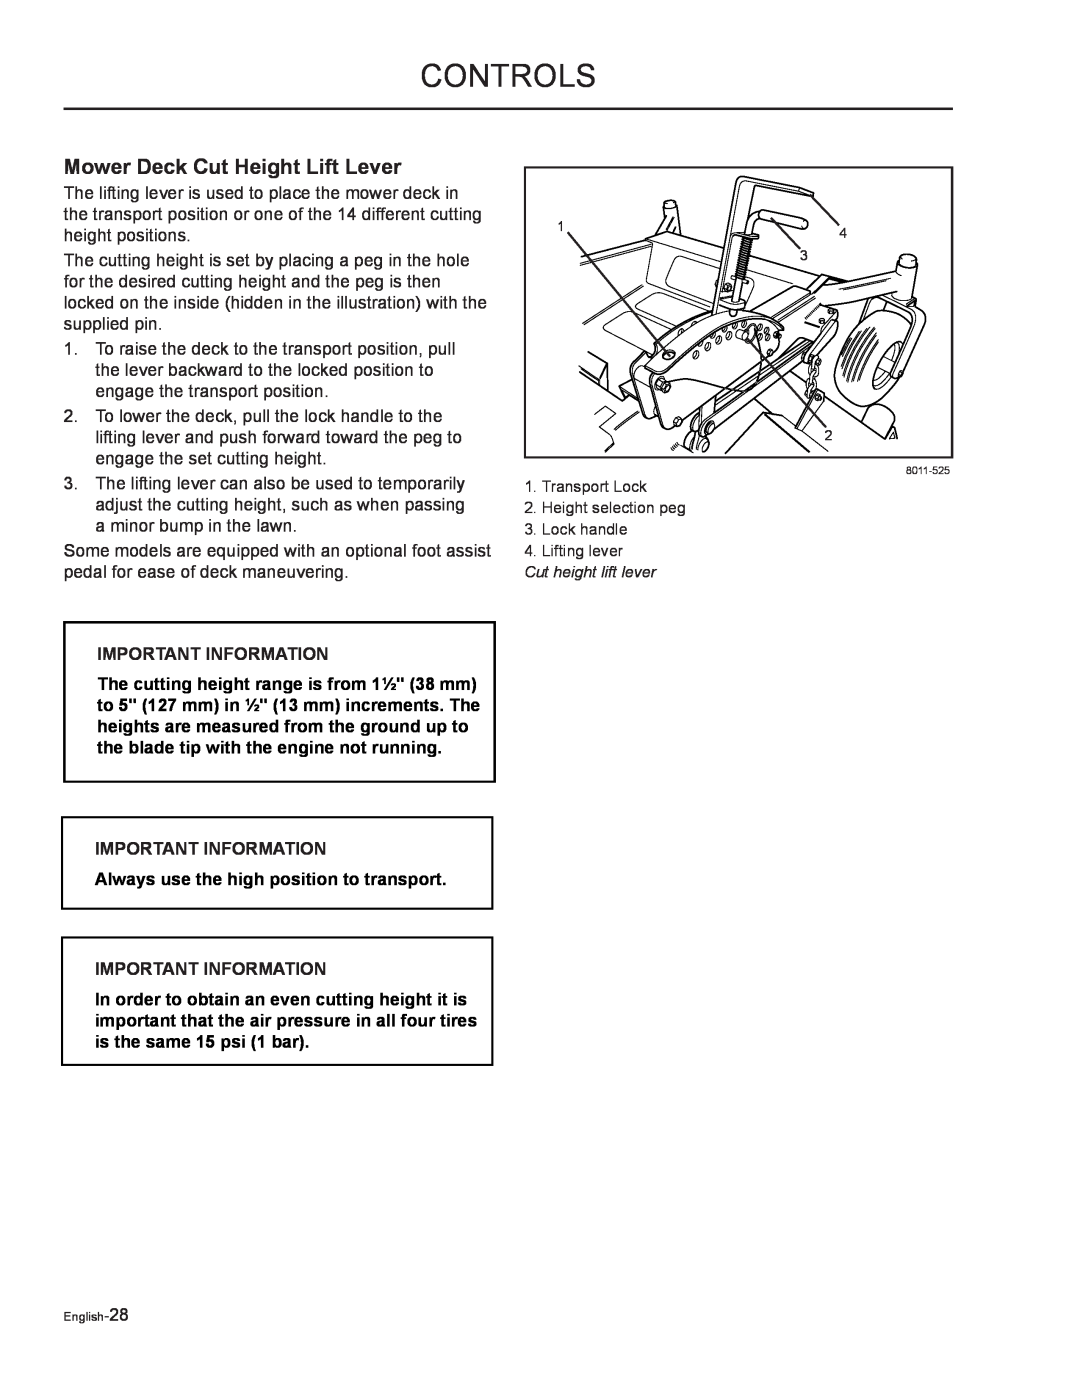 Yazoo/Kees ZMKH52252 Mower Deck Cut Height Lift Lever, IMPORTANT INFORMATION Always use the high position to transport 